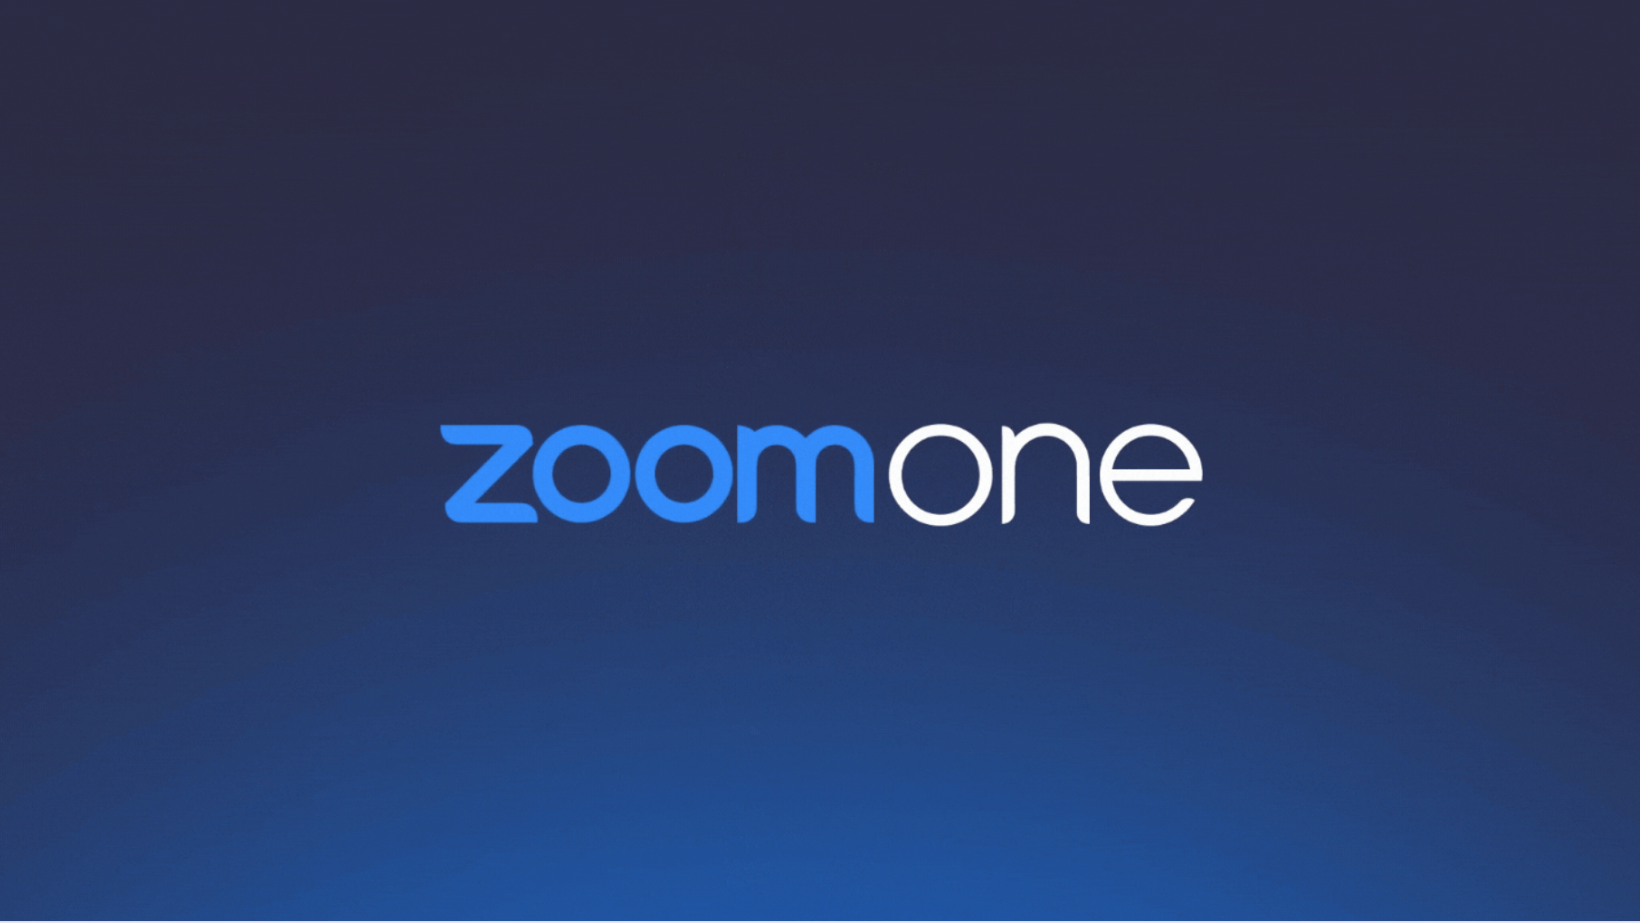 What is Zoom One?